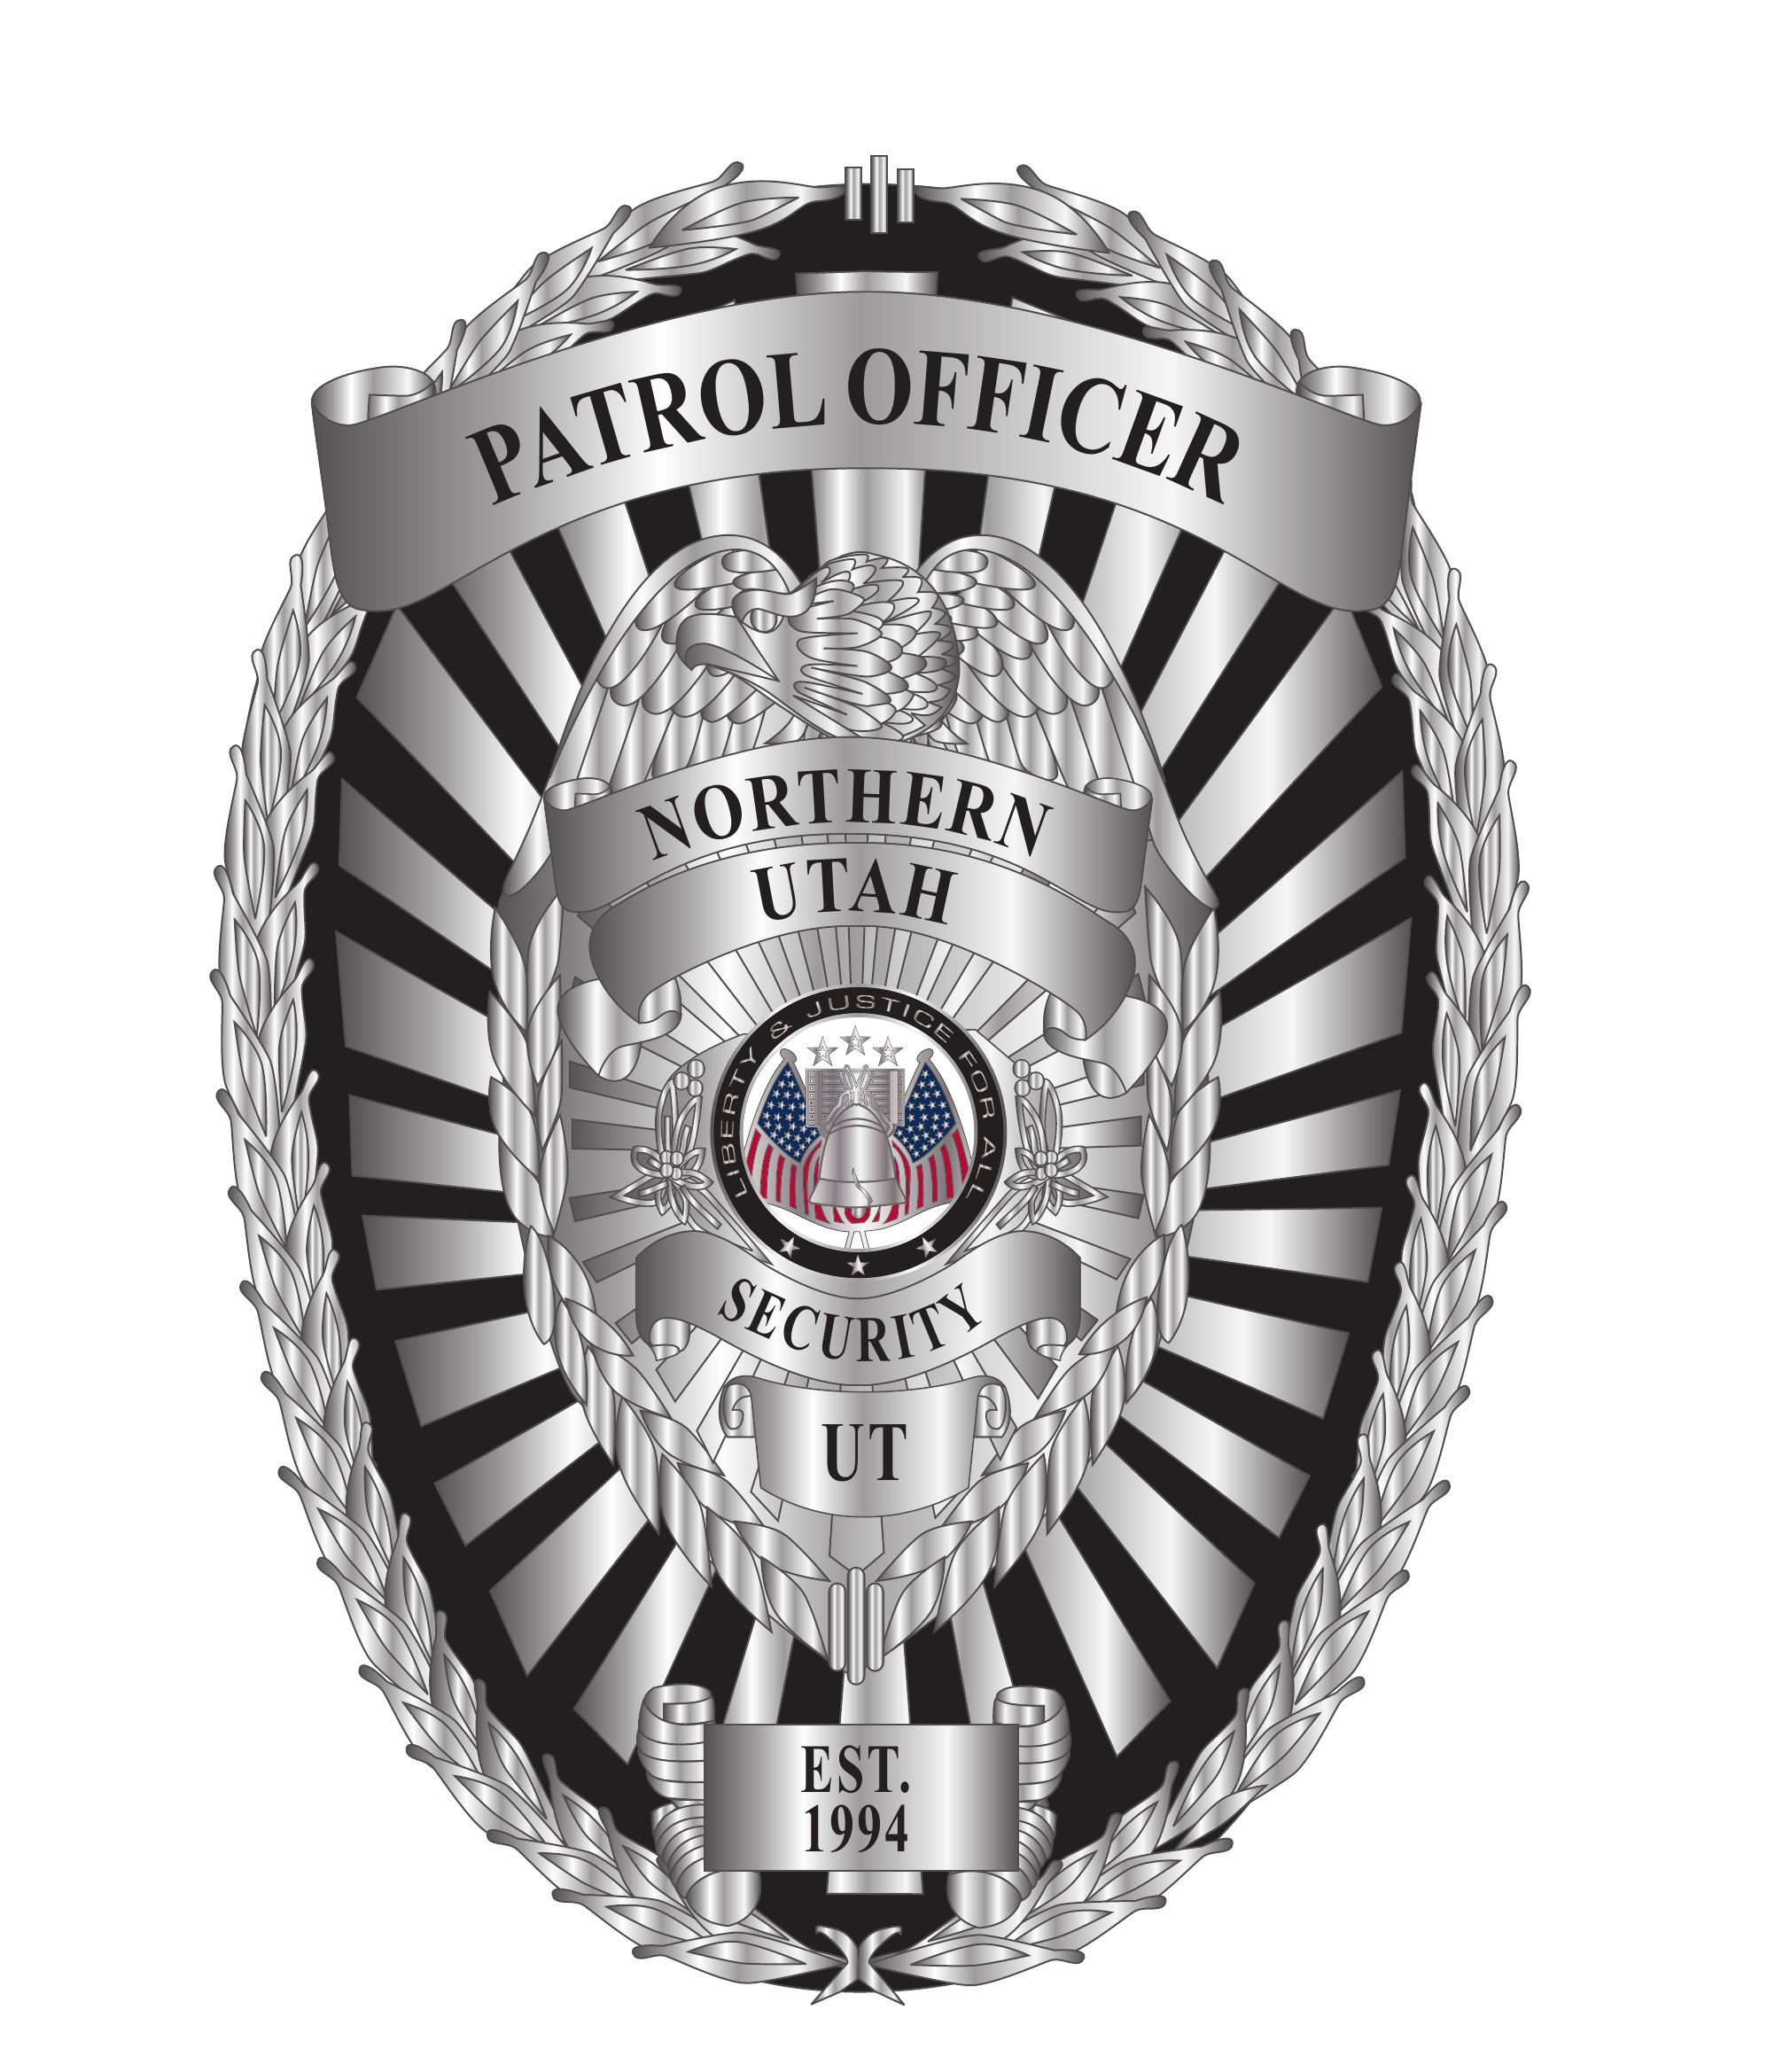 Northern Utah Protection & Security Service